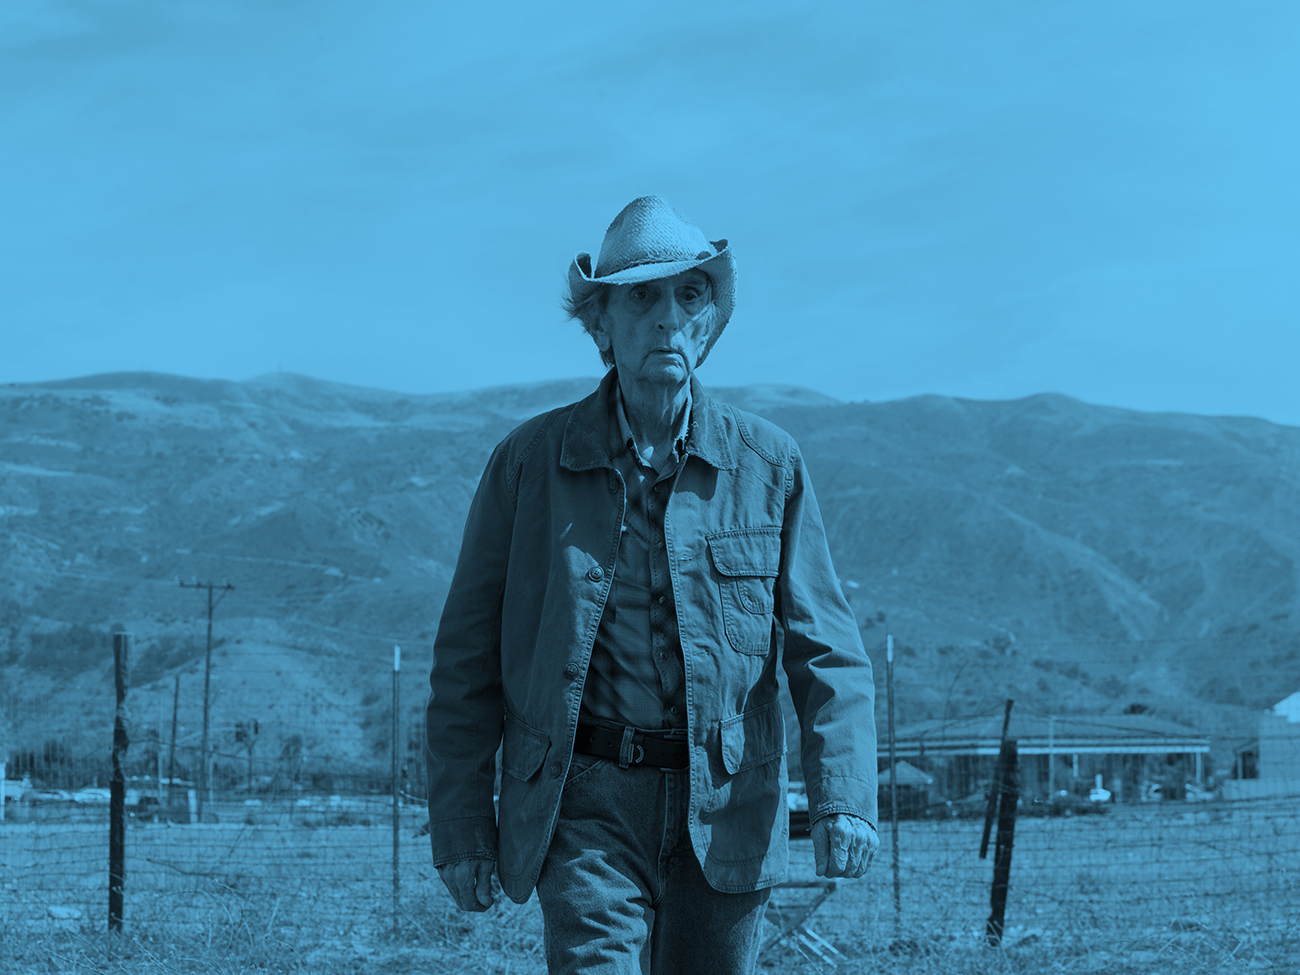 LUCKY © Harry Dean Stanton in LUCKY, a Magnolia Pictures release. Photo courtesy of M4